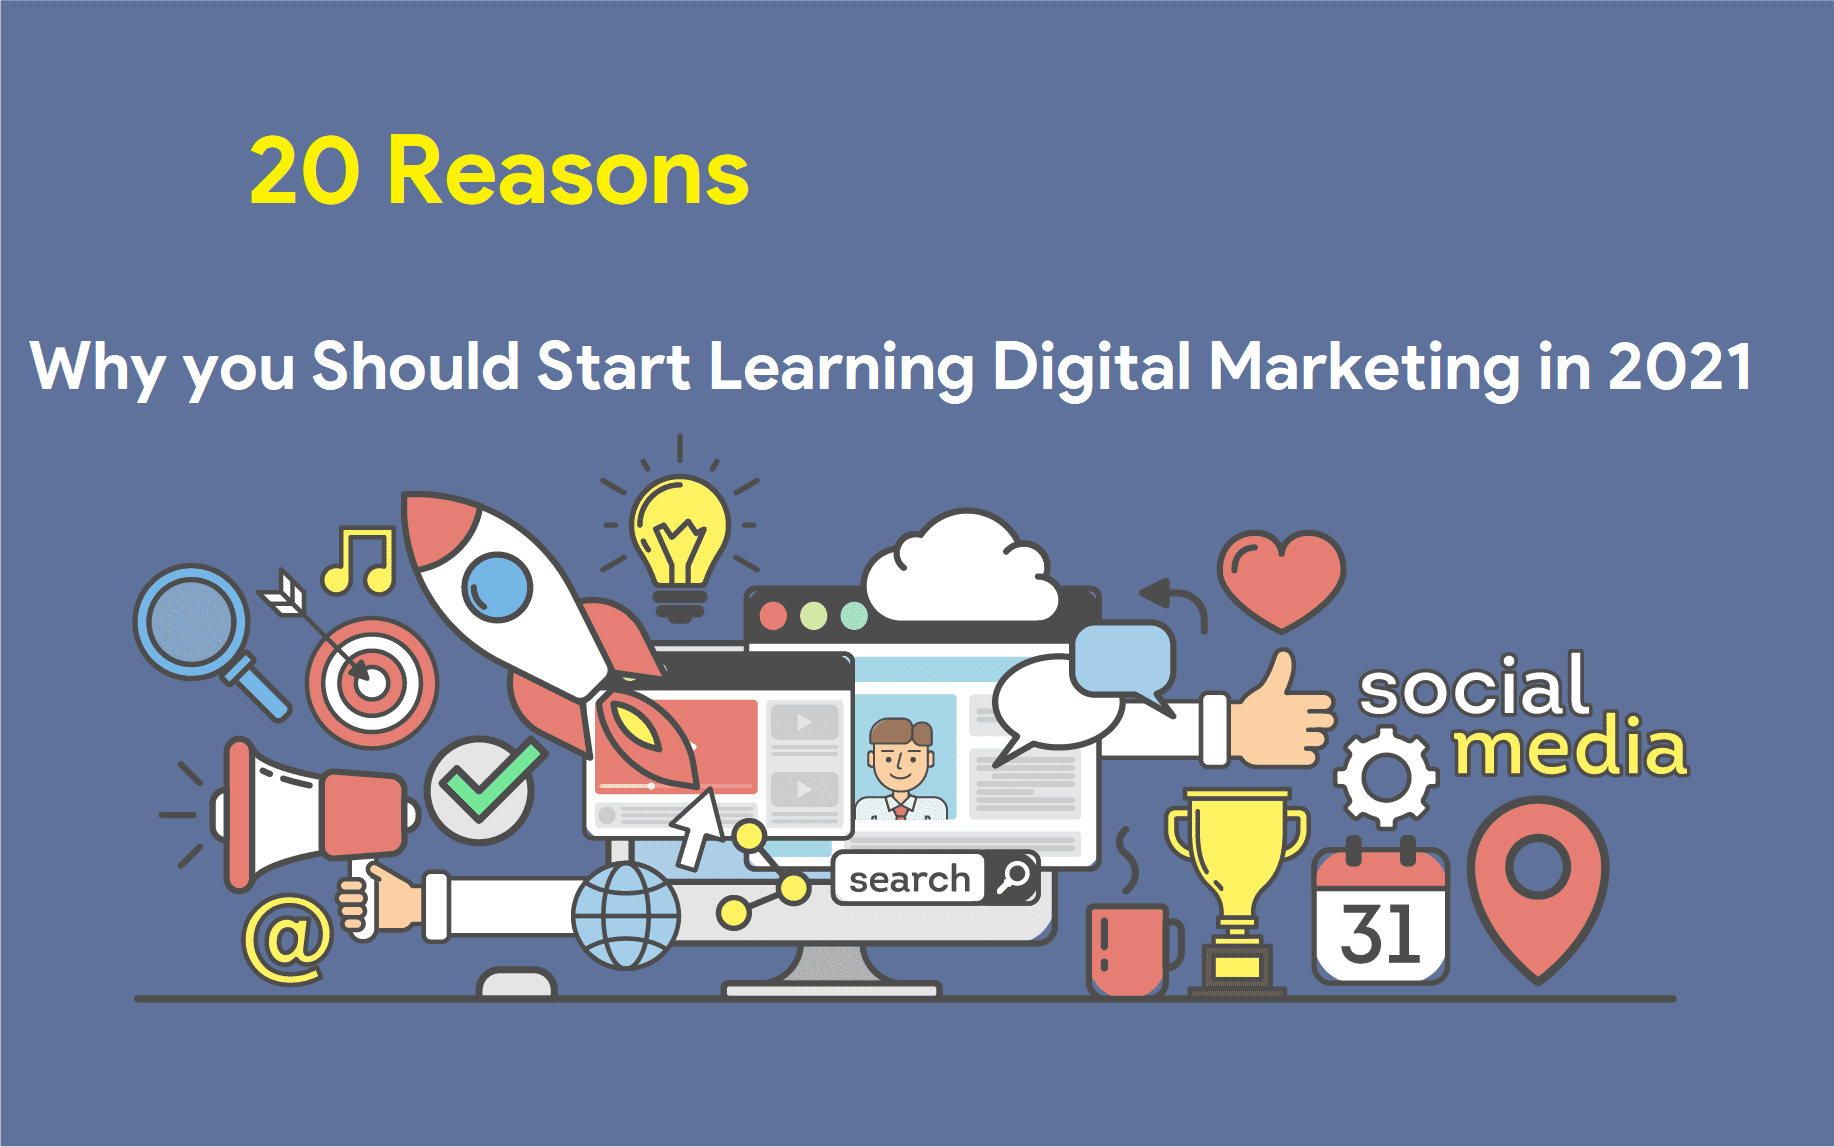 20 Reasons Why you Should Start Learning Digital Marketing in 2021